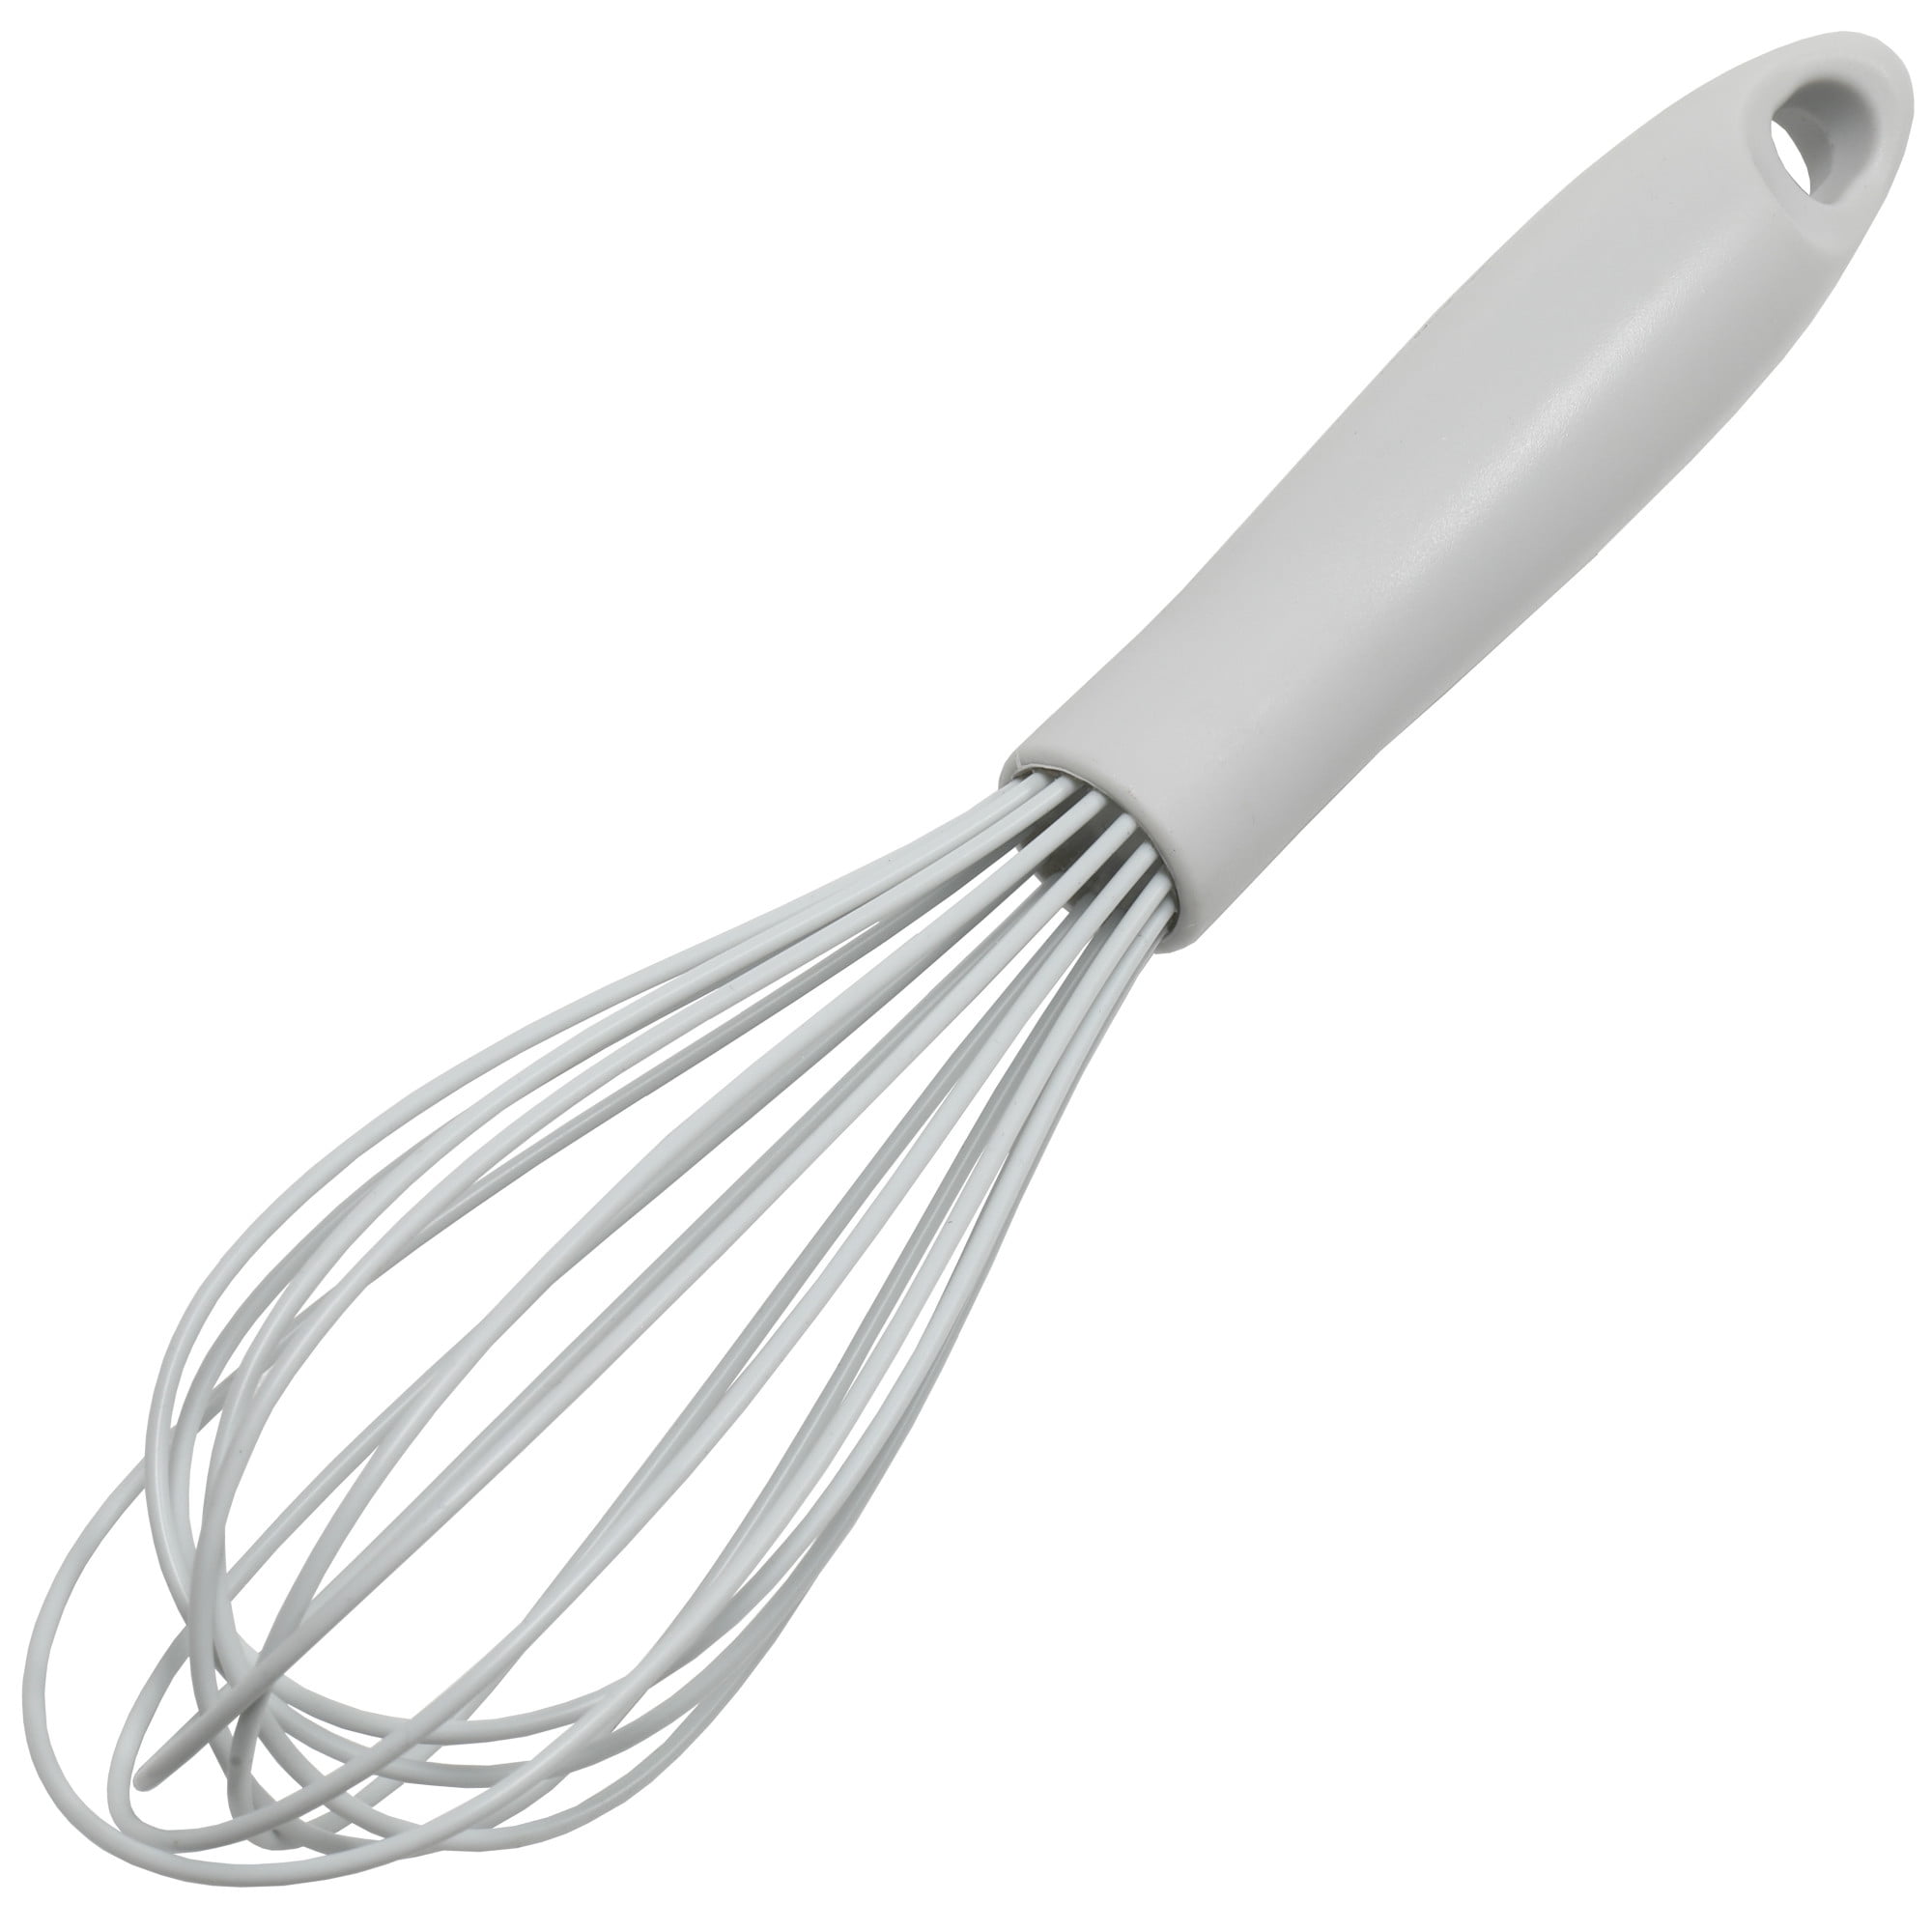 KitchenCraft KCSHWHISK Rotary Hand Whisk, Stainless Steel/Plastic,  Silver/White 6.5 x 13 x 27.5 centimetres